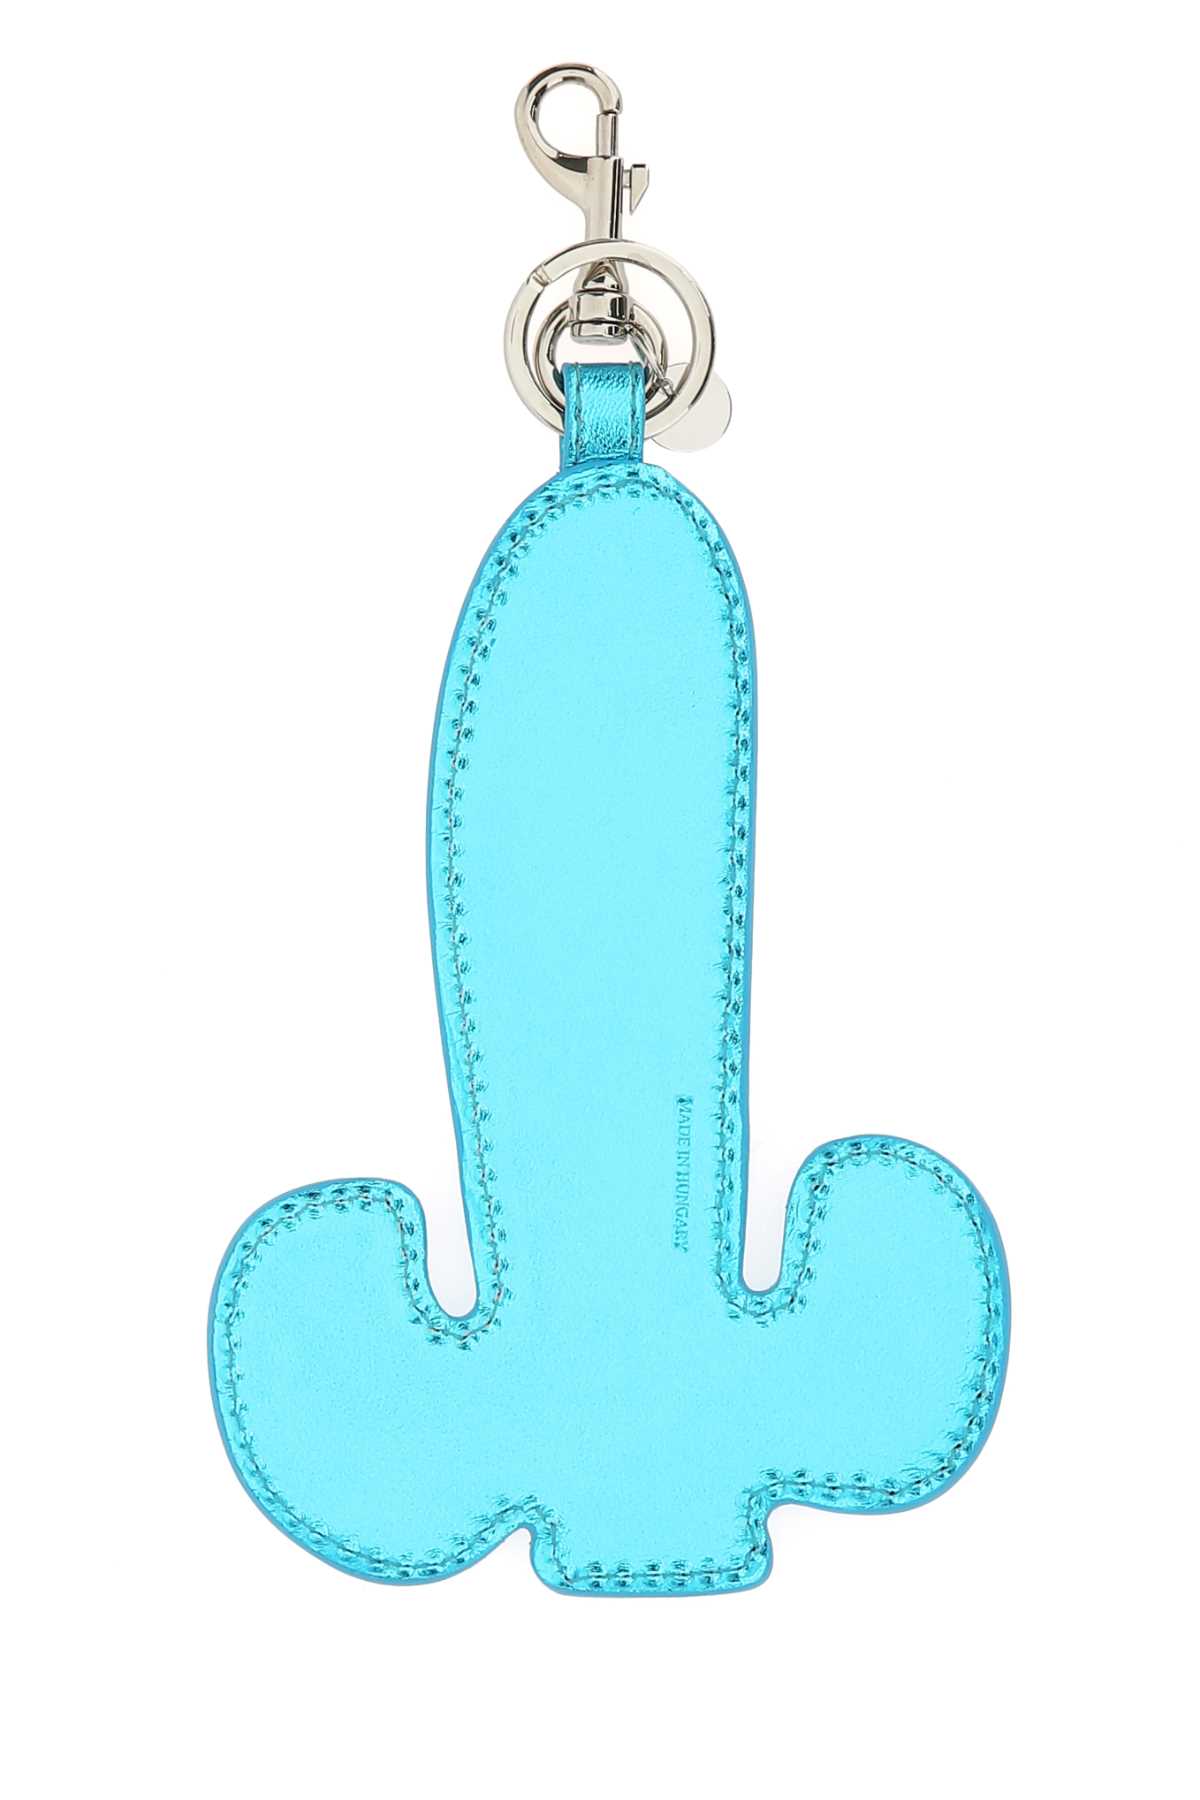 Jw Anderson Light Blue Leather Key Chain In 840